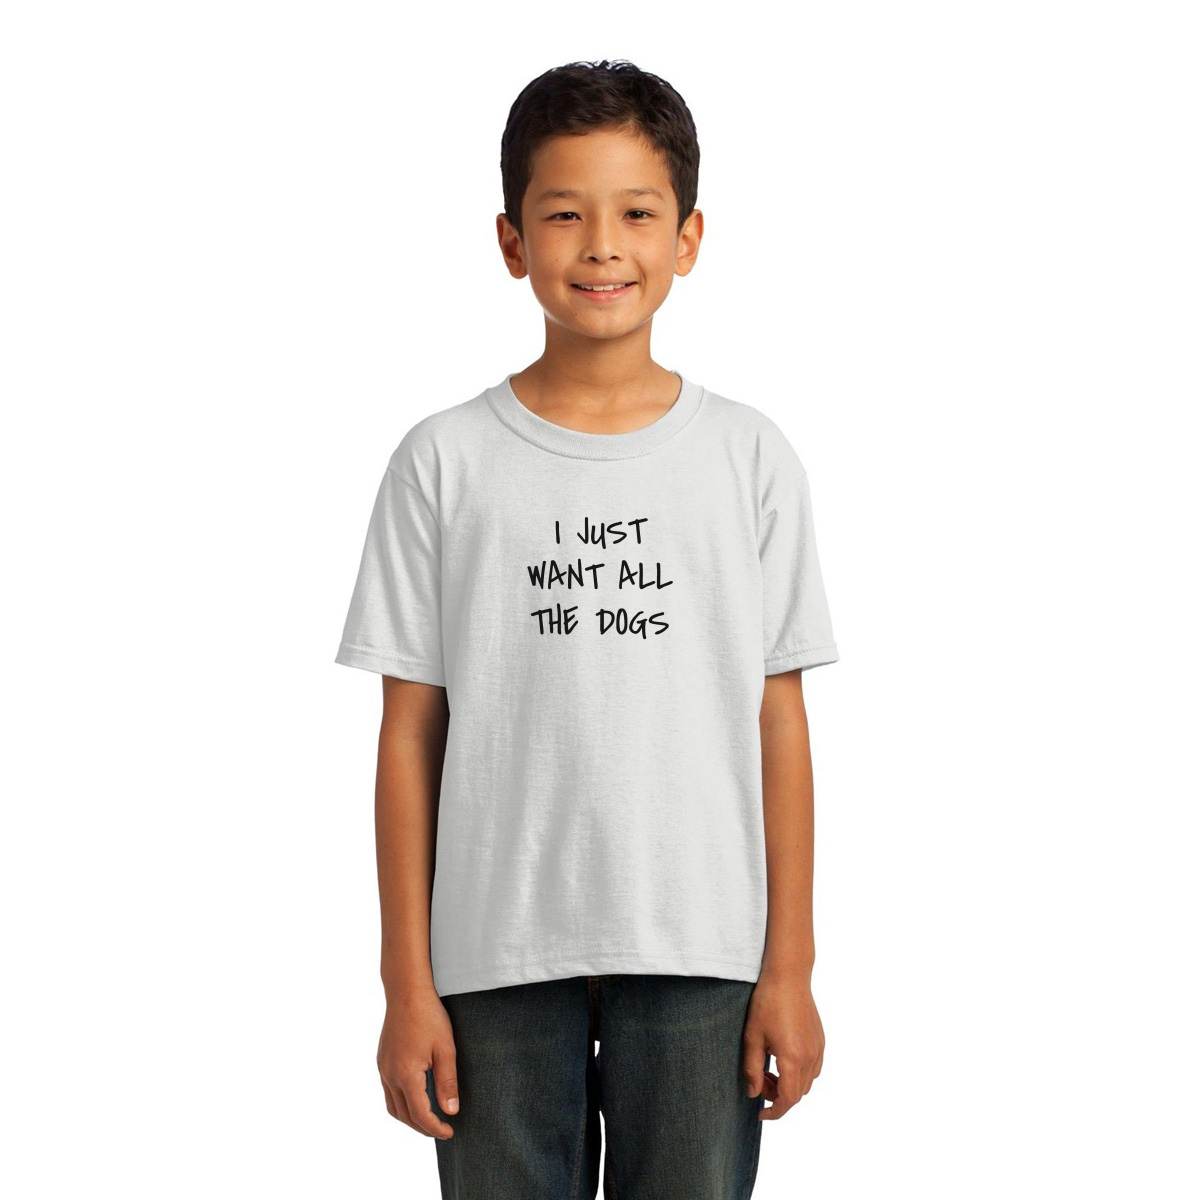 I Just Want All the Dogs Kids T-shirt | White